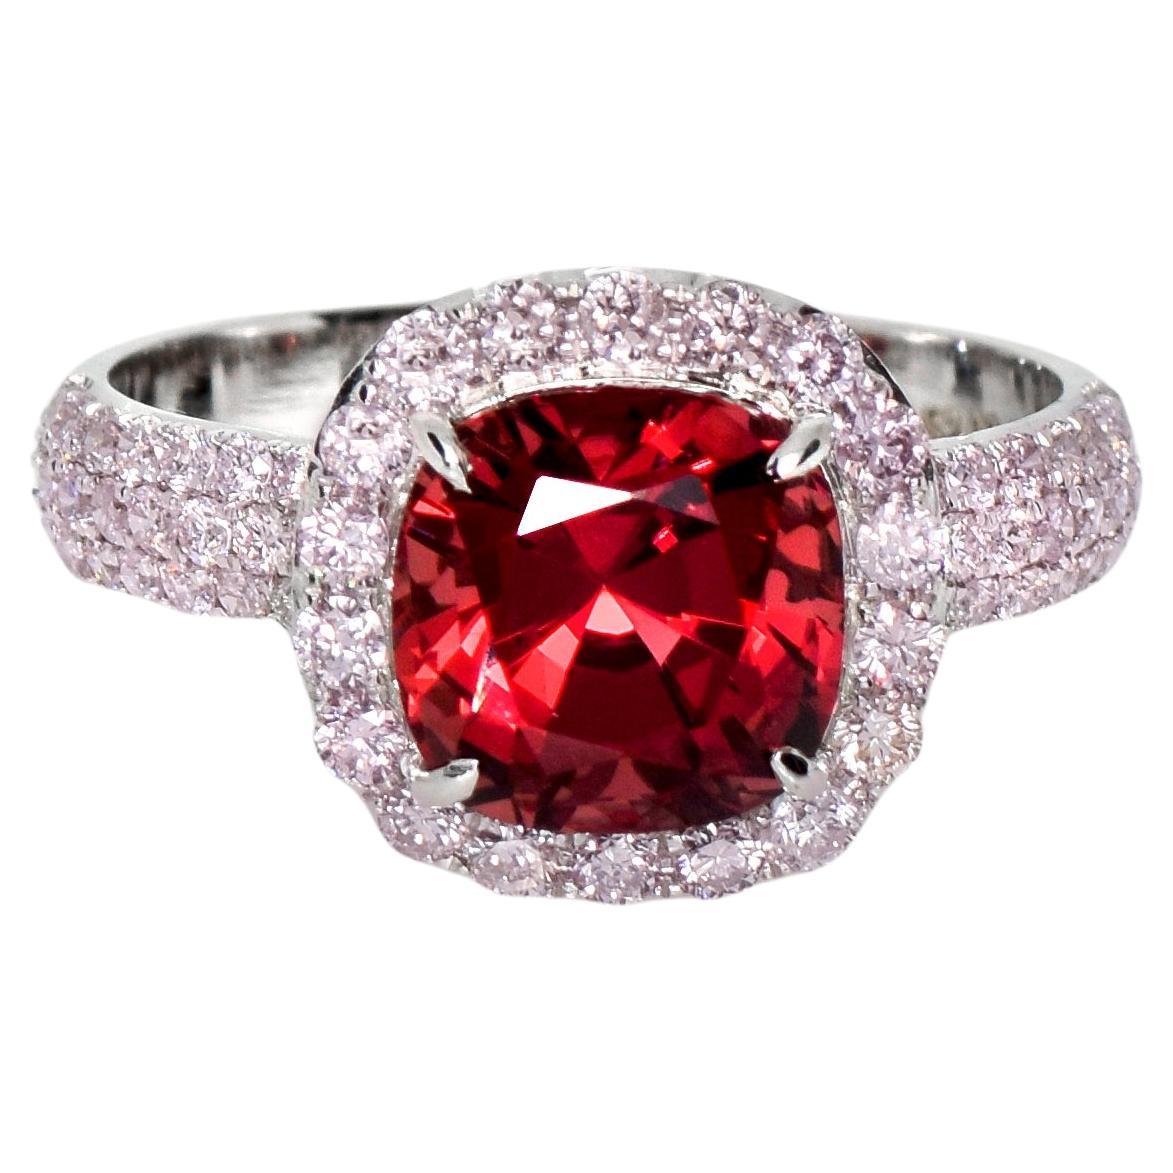 What does a red engagement ring mean?